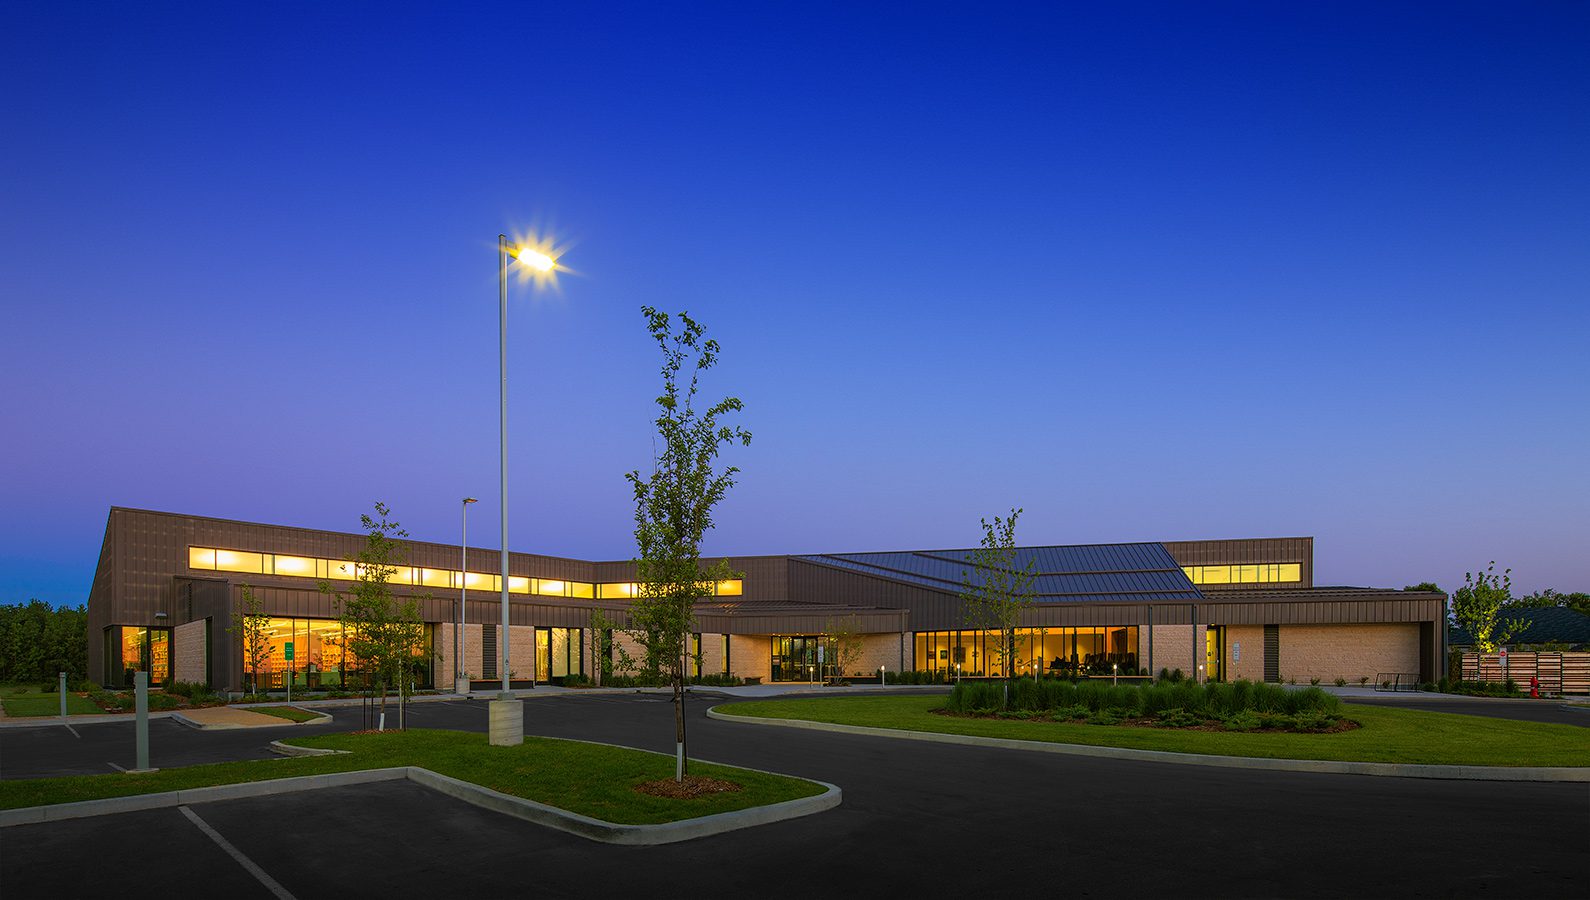 The exterior of Gaynor Family Regional Library at night.